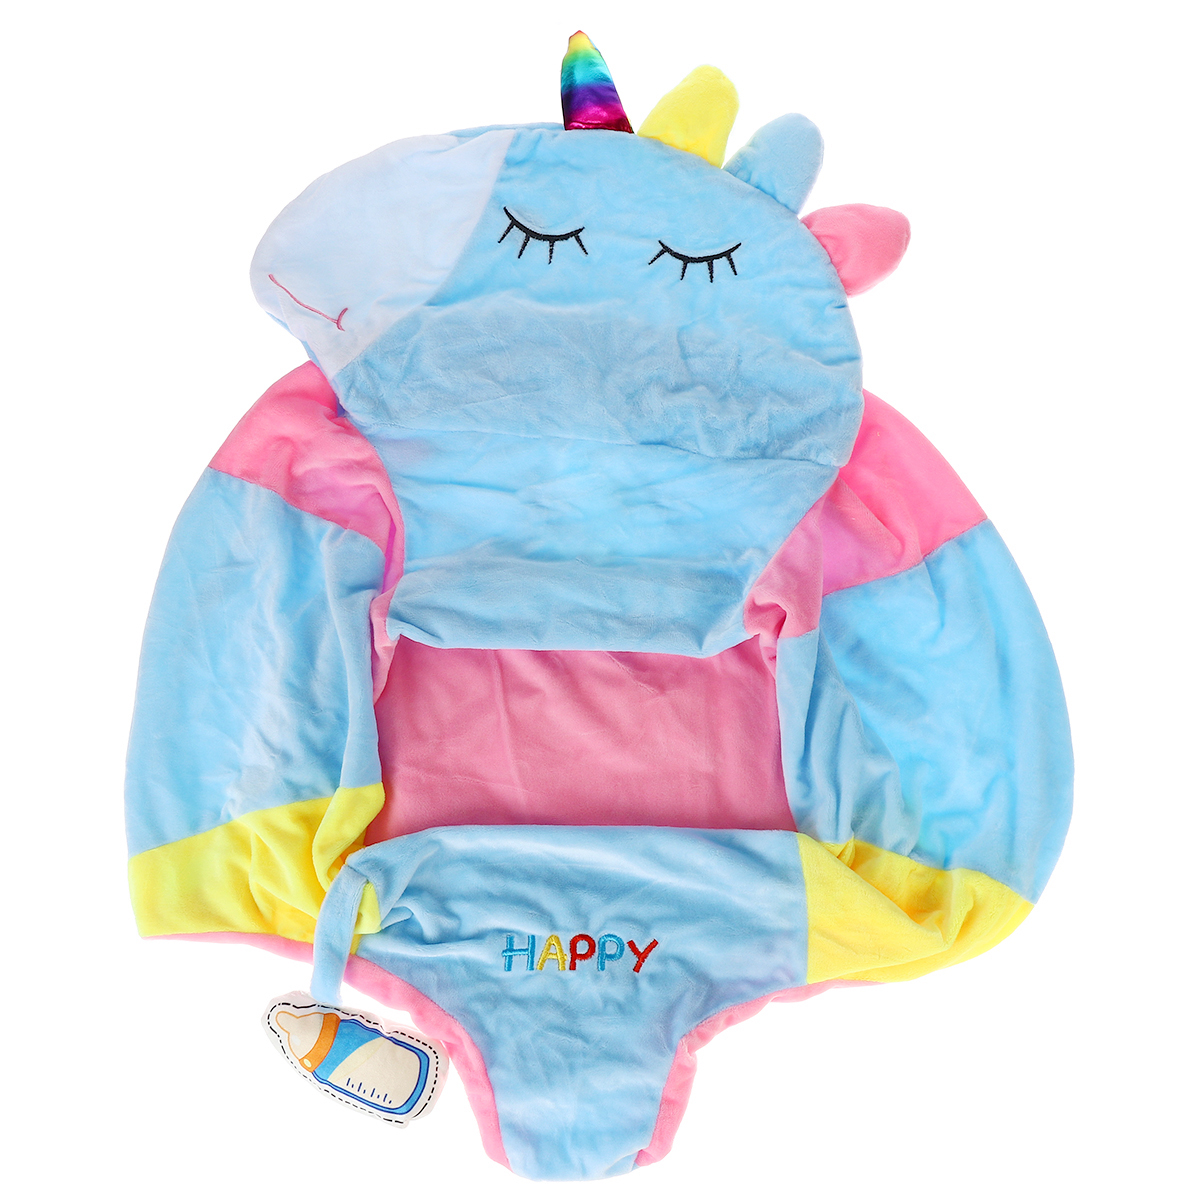 Multi-Style-Kids-Baby-Support-Seats-Sit-Up-Soft-Chair-Sofa-Cartoon-Animal-Kids-Learning-To-Sit-Plush-1817560-8